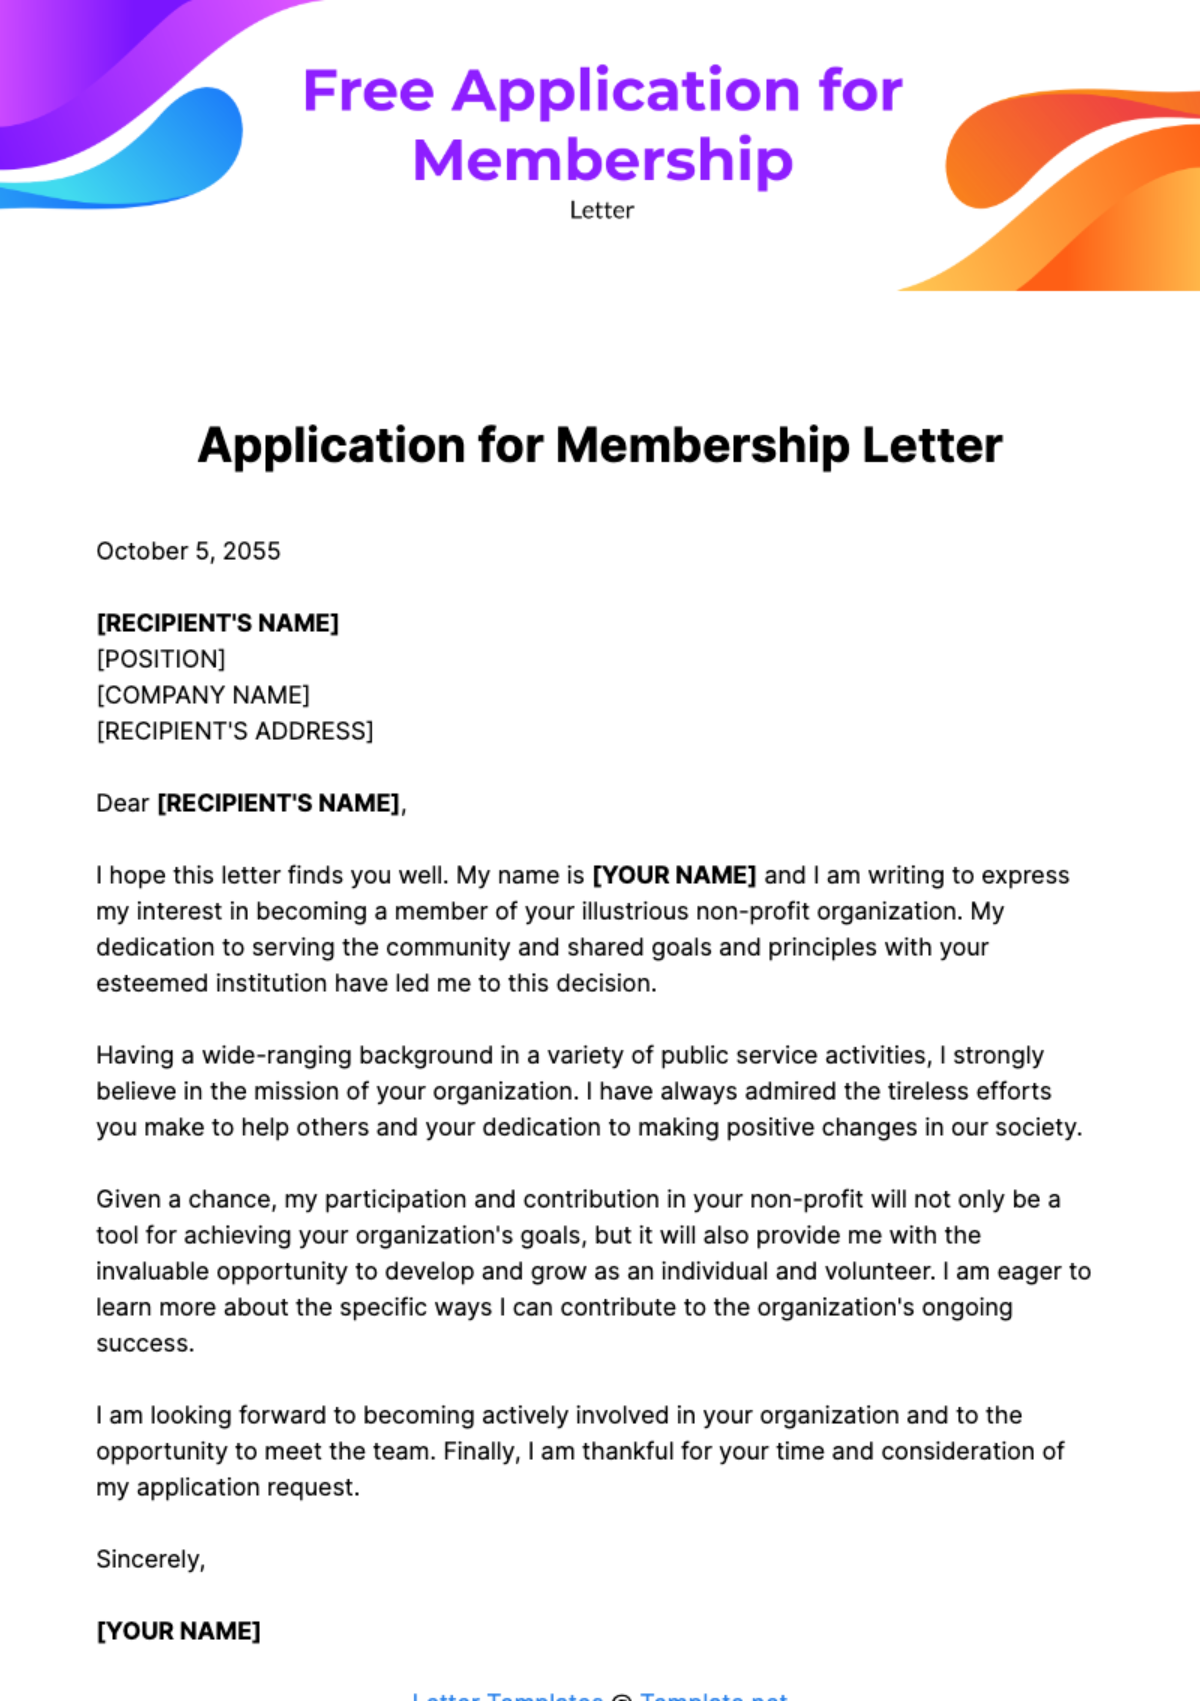 Free Application for Membership Letter Template